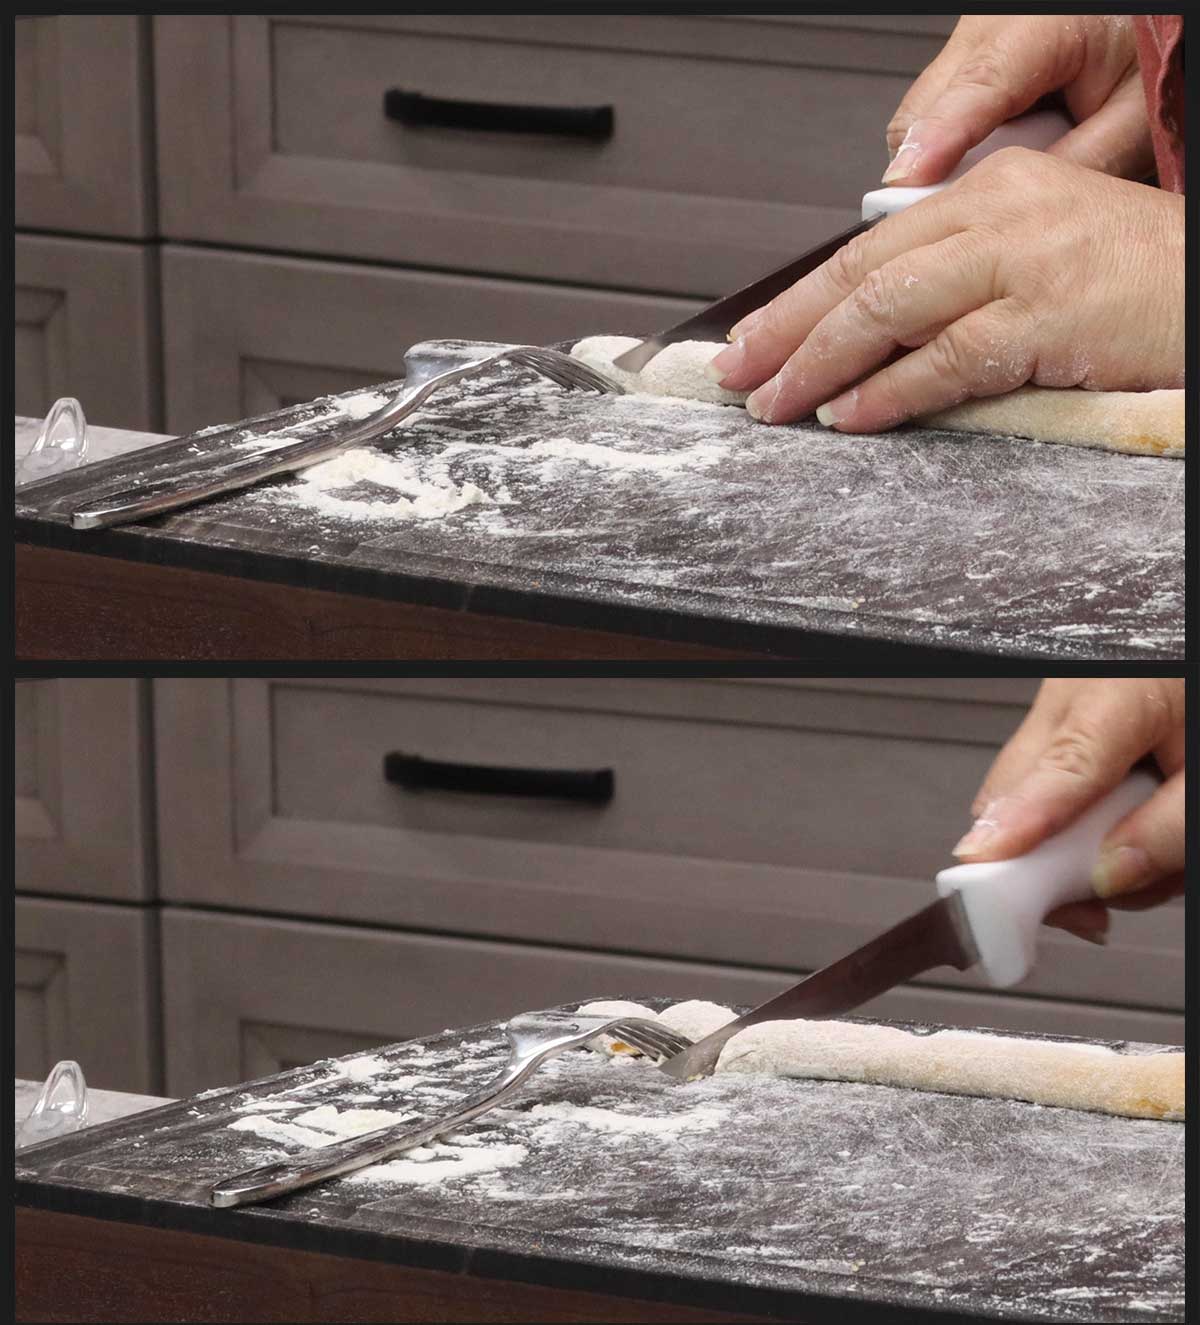 cutting the gnocchi using a fork as a guide.